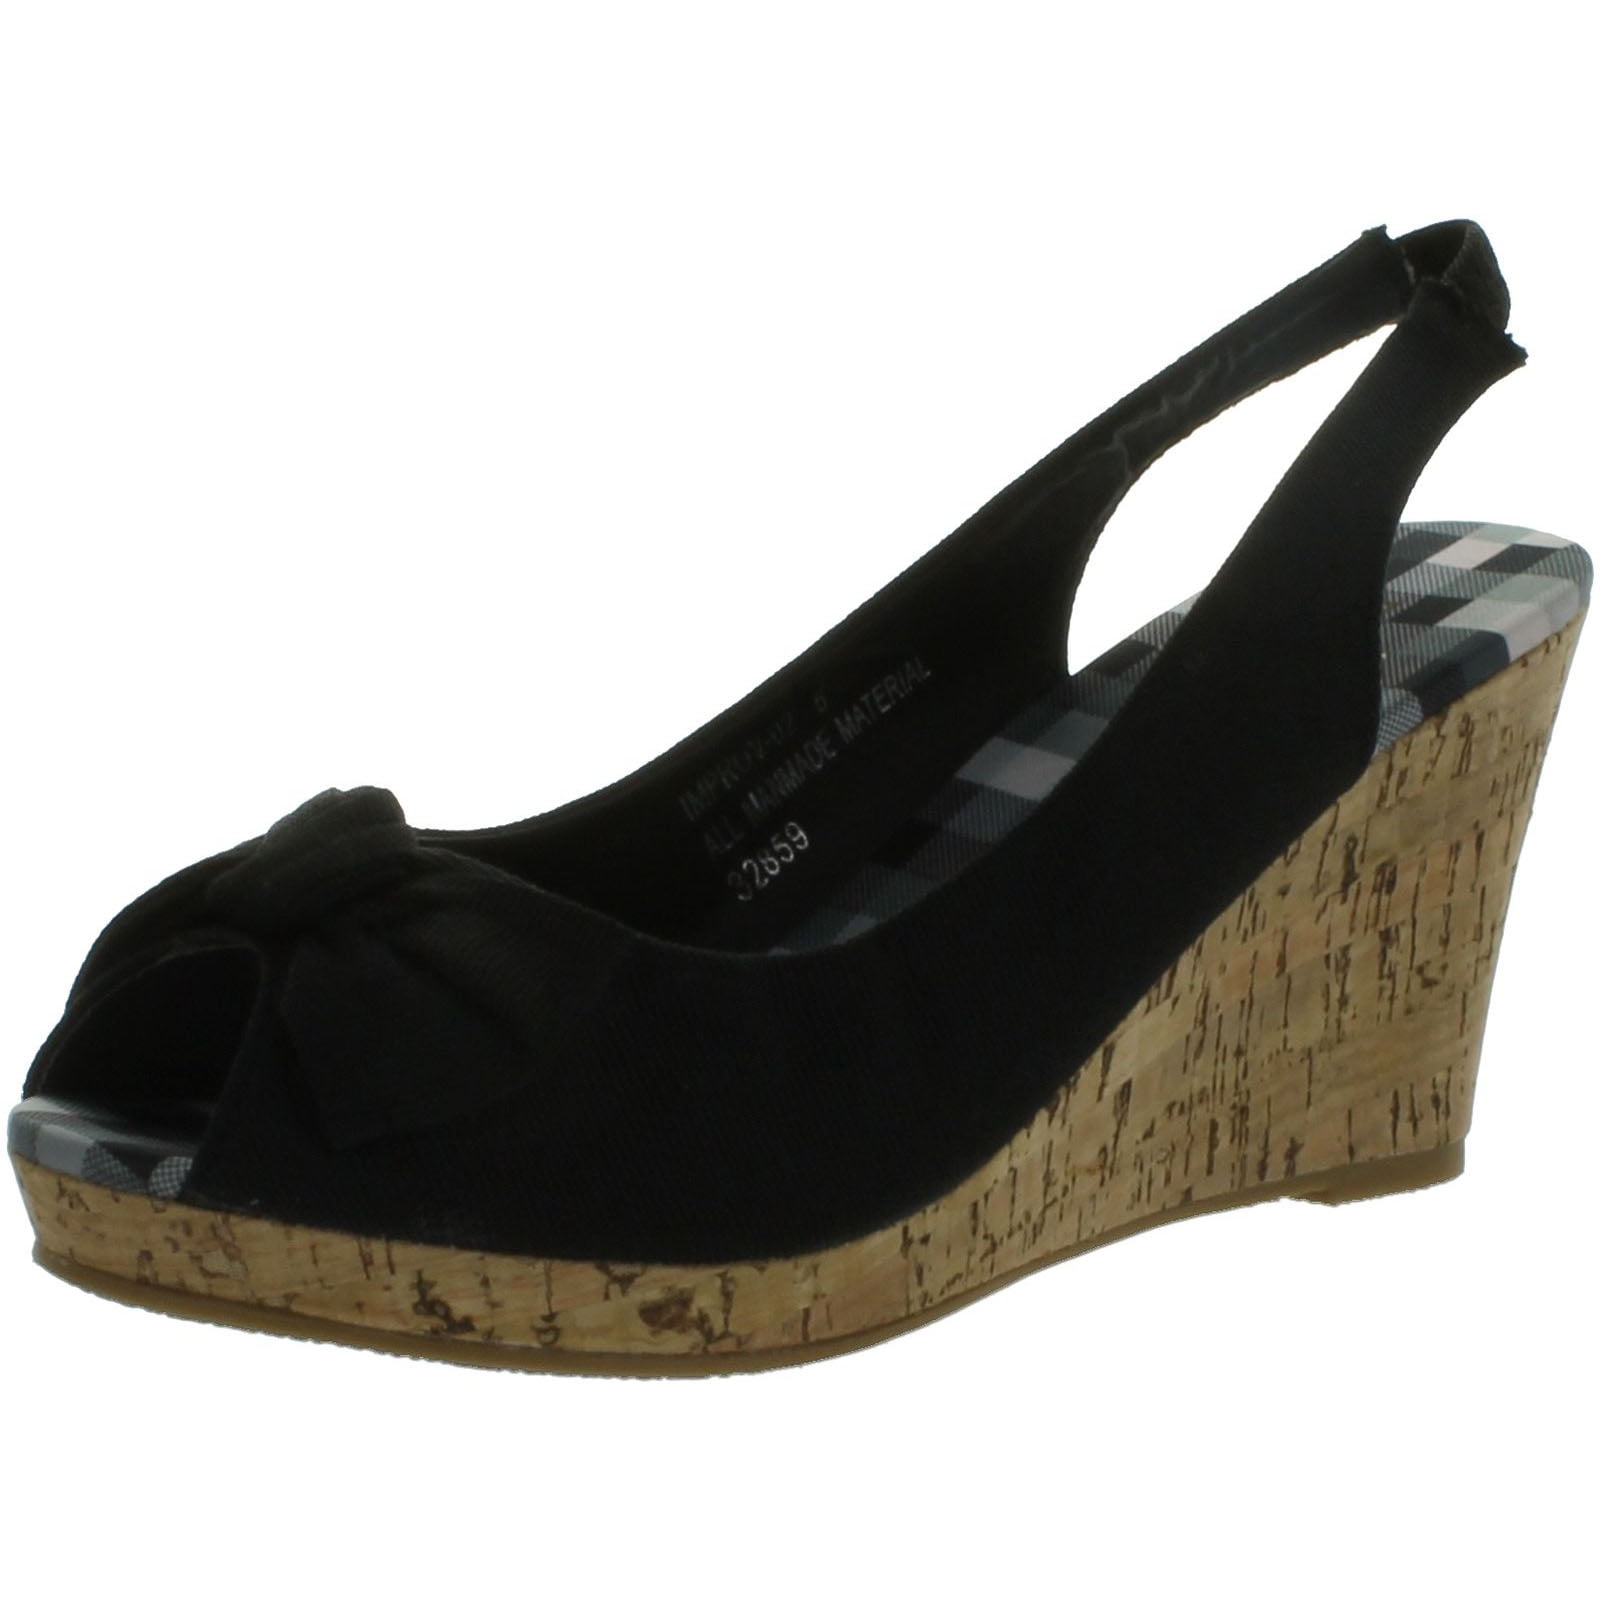 Bamboo - Bamboo Women's Wedge Sandals with Faux Cork Sole and Bow ...